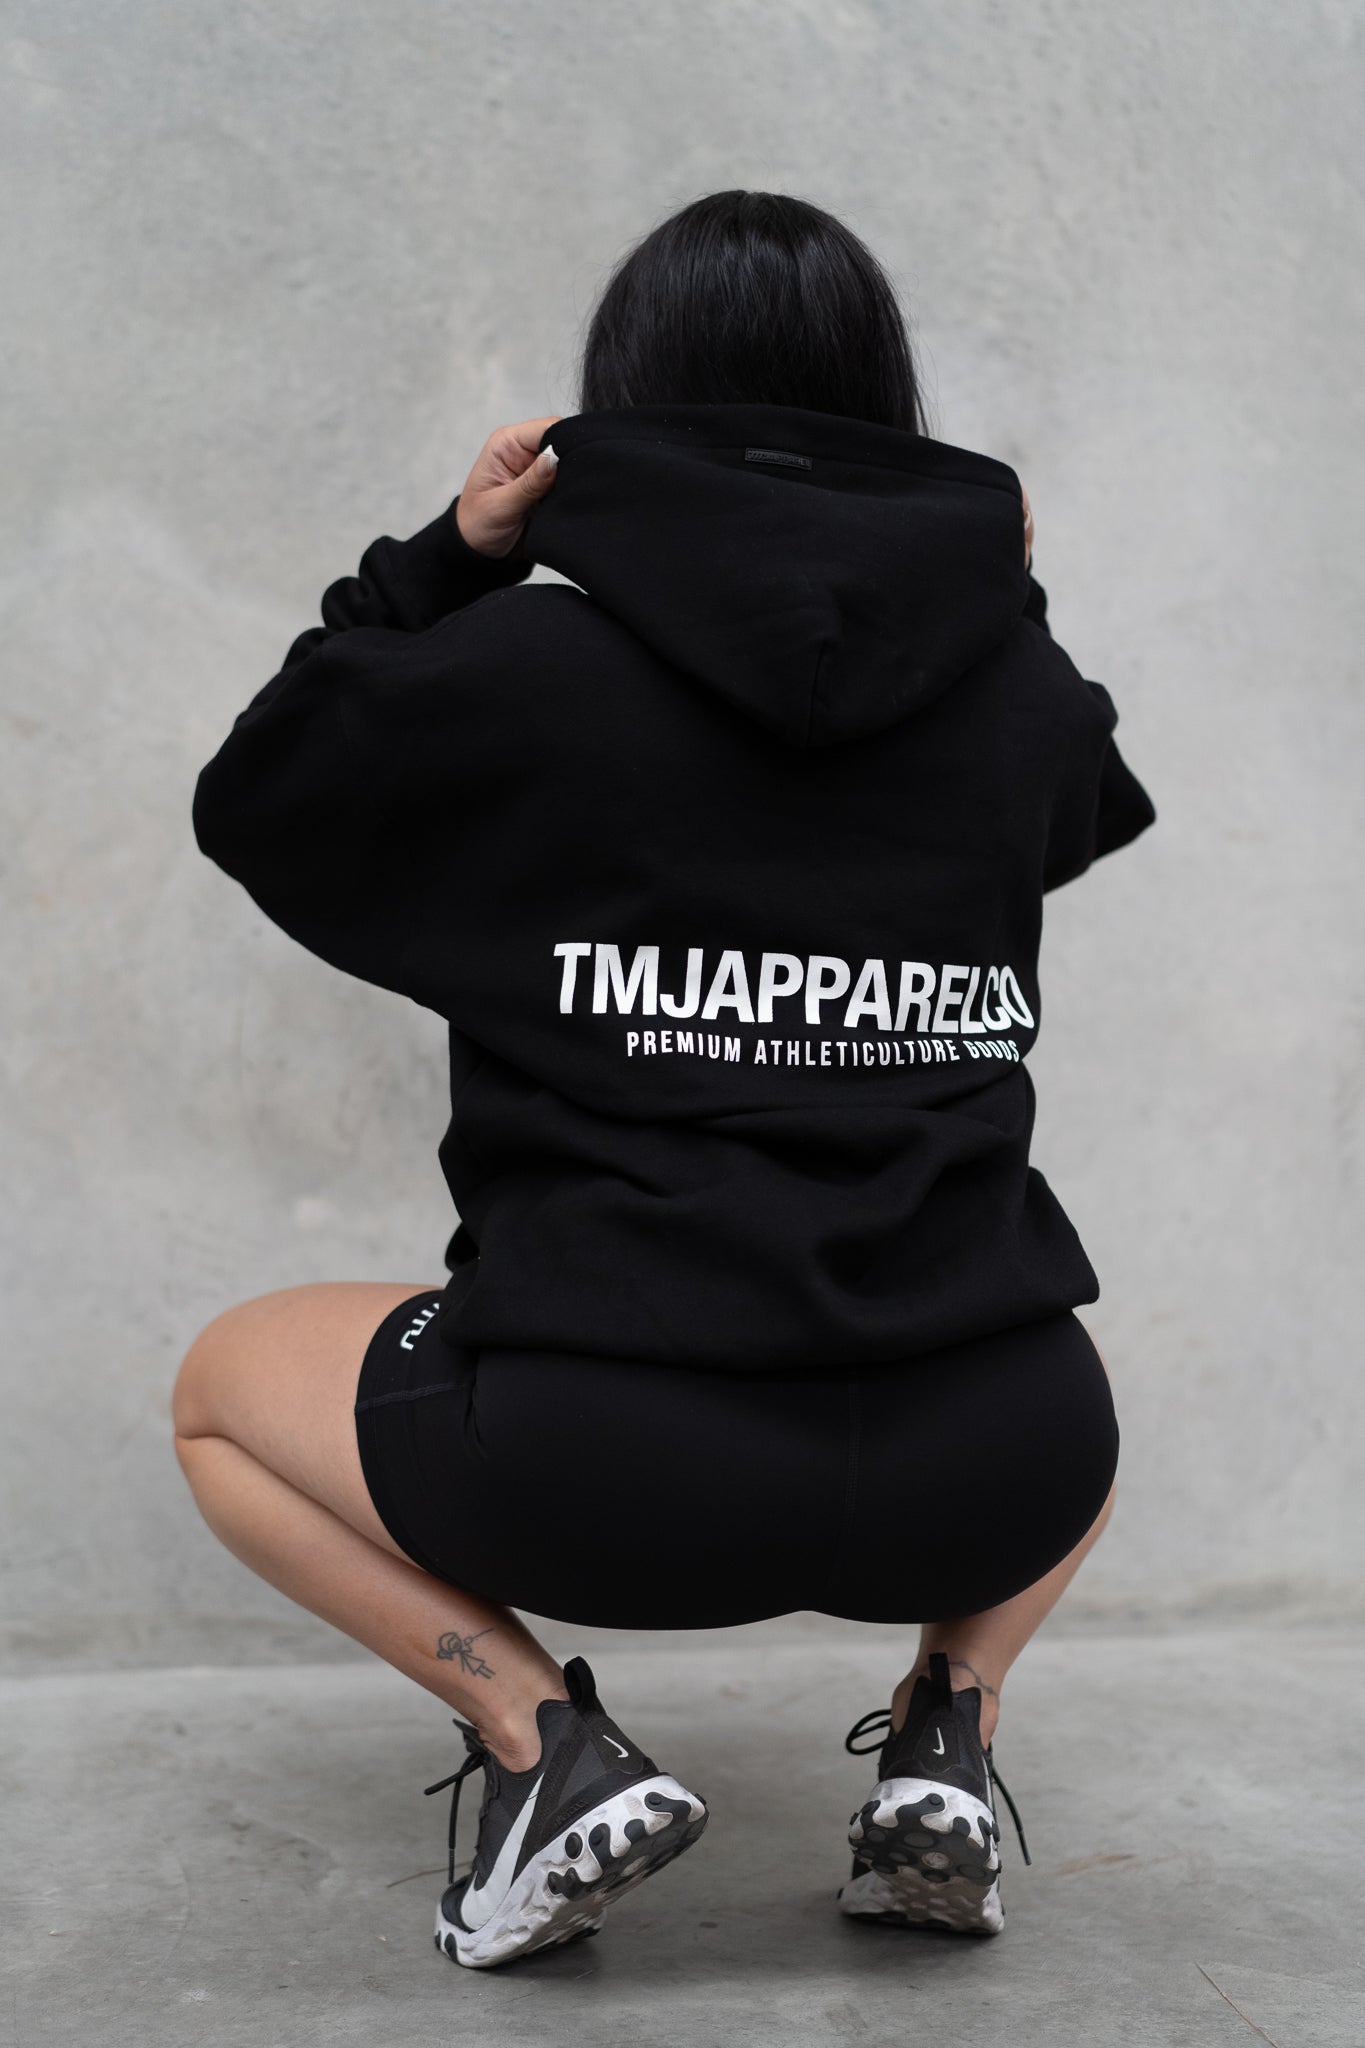 Female wearing TMJ Apparel Athleticulture Hoodie in Black showing the back of the hoodie with white text saying TMJAPPARELCO Premium Athleticulture Goods in the middle centre of back.